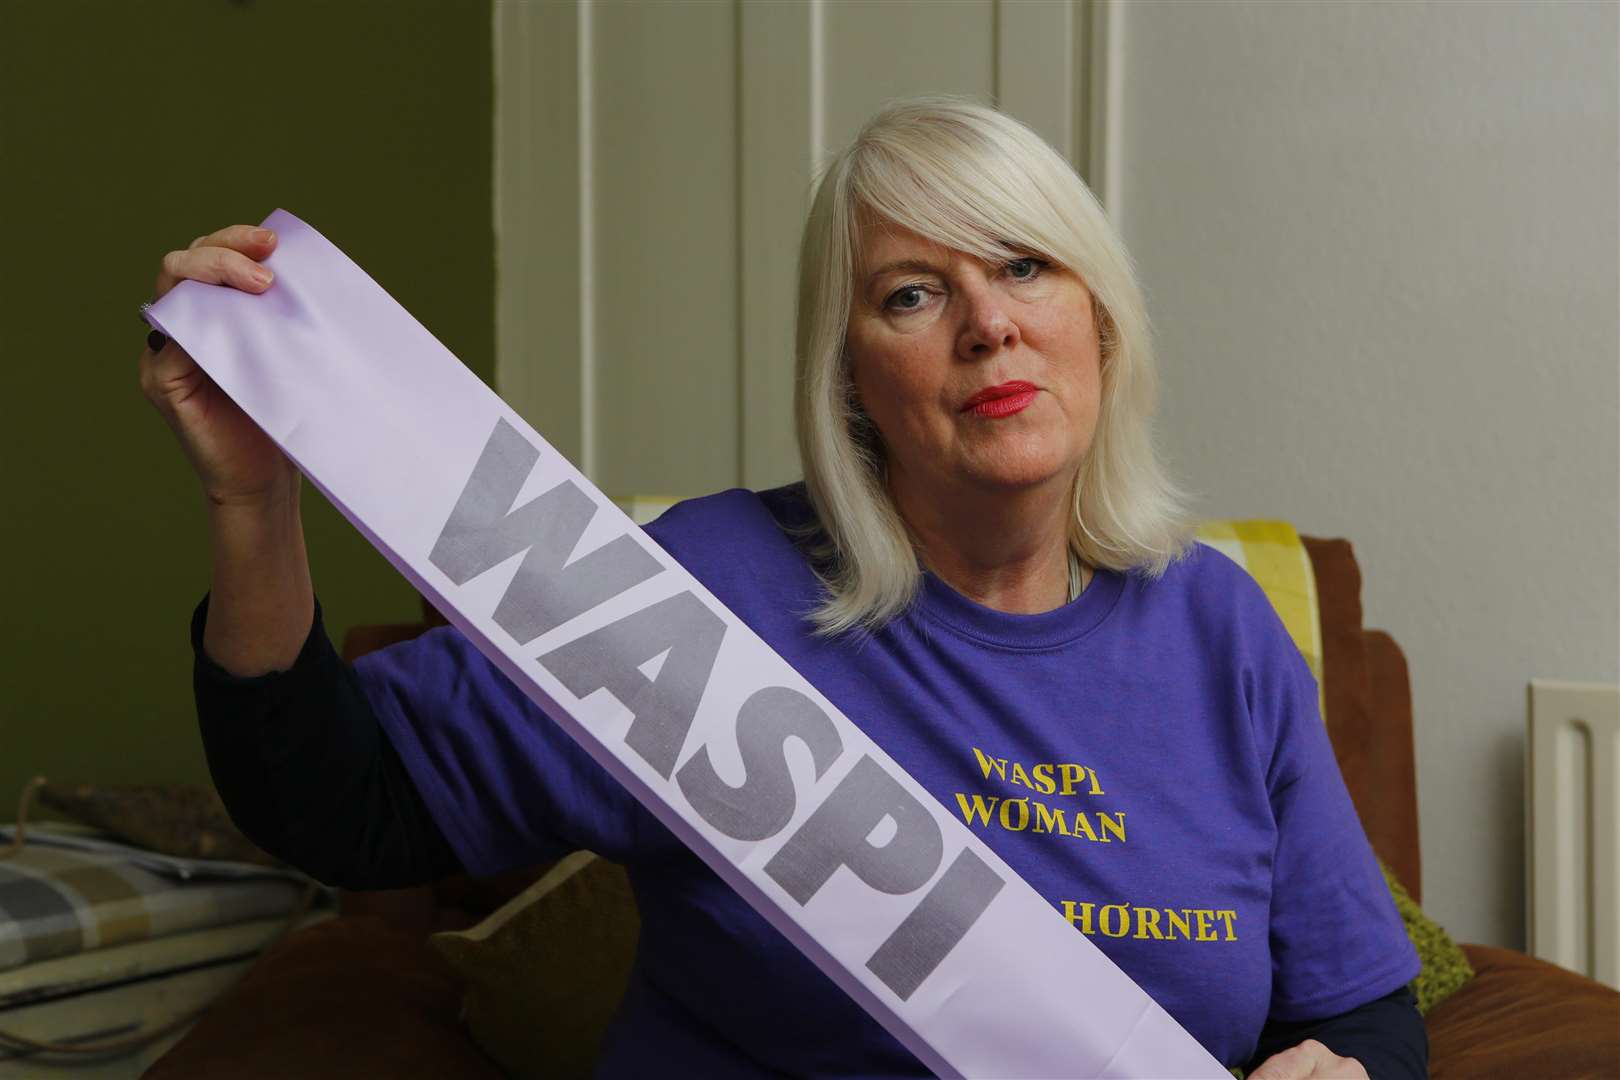 Deena Wild from East Kent WASPI and is campaigning against the changes to the state pension. Picture: Andy Jones